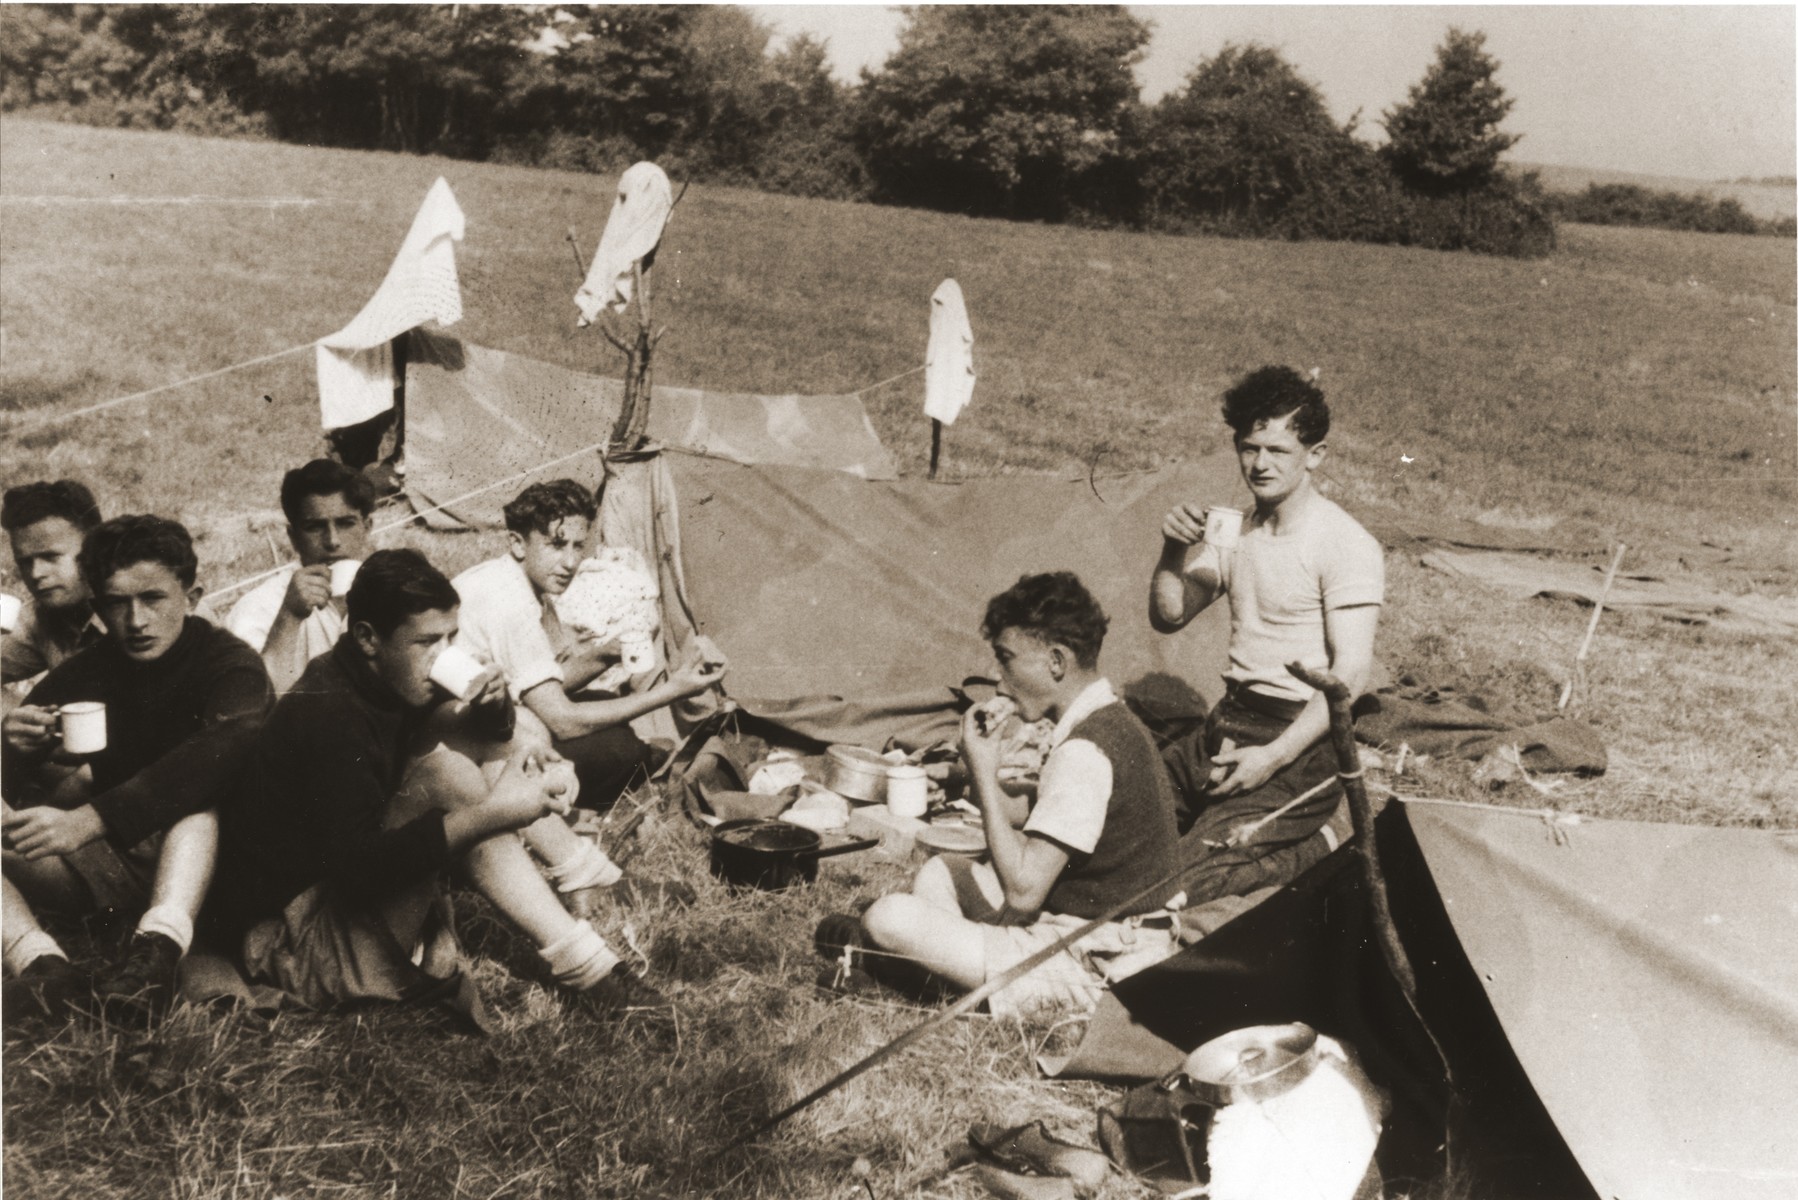 Members of the orphans transport to England go camping on the Isle of Wight.

Among those pictured are Paul Gast (center), Szlomo Kuszerman (second from the right) and Moniek Goldberg (right).